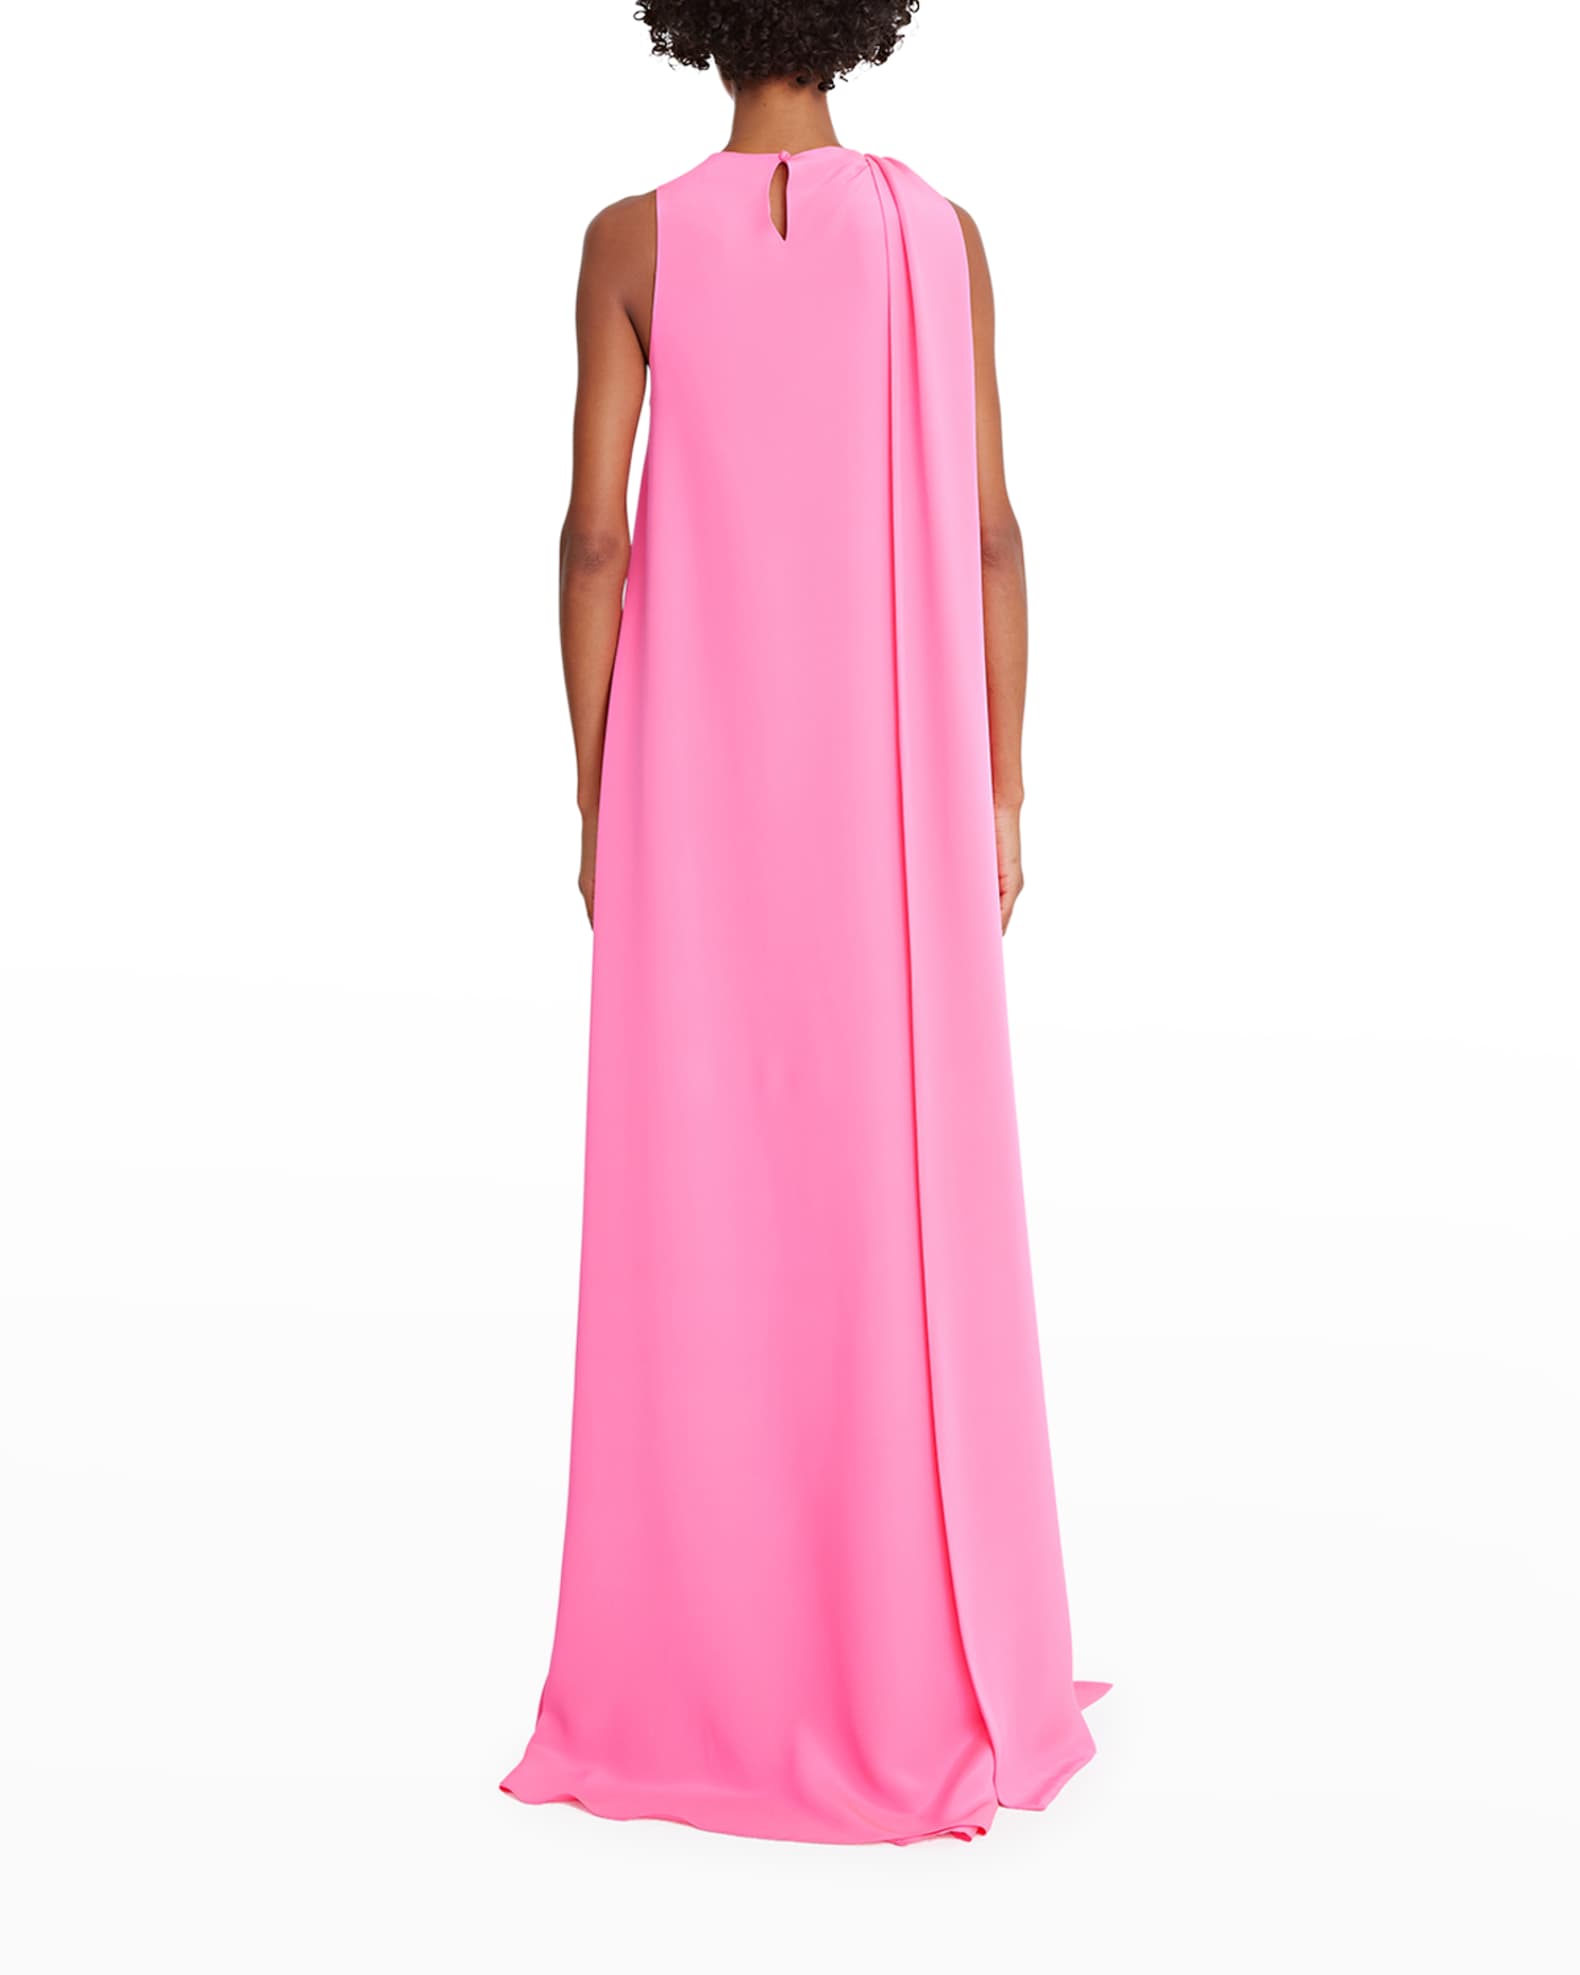 Halston Kendra Crepe Knotted Gown w/ Drape | Neiman Marcus